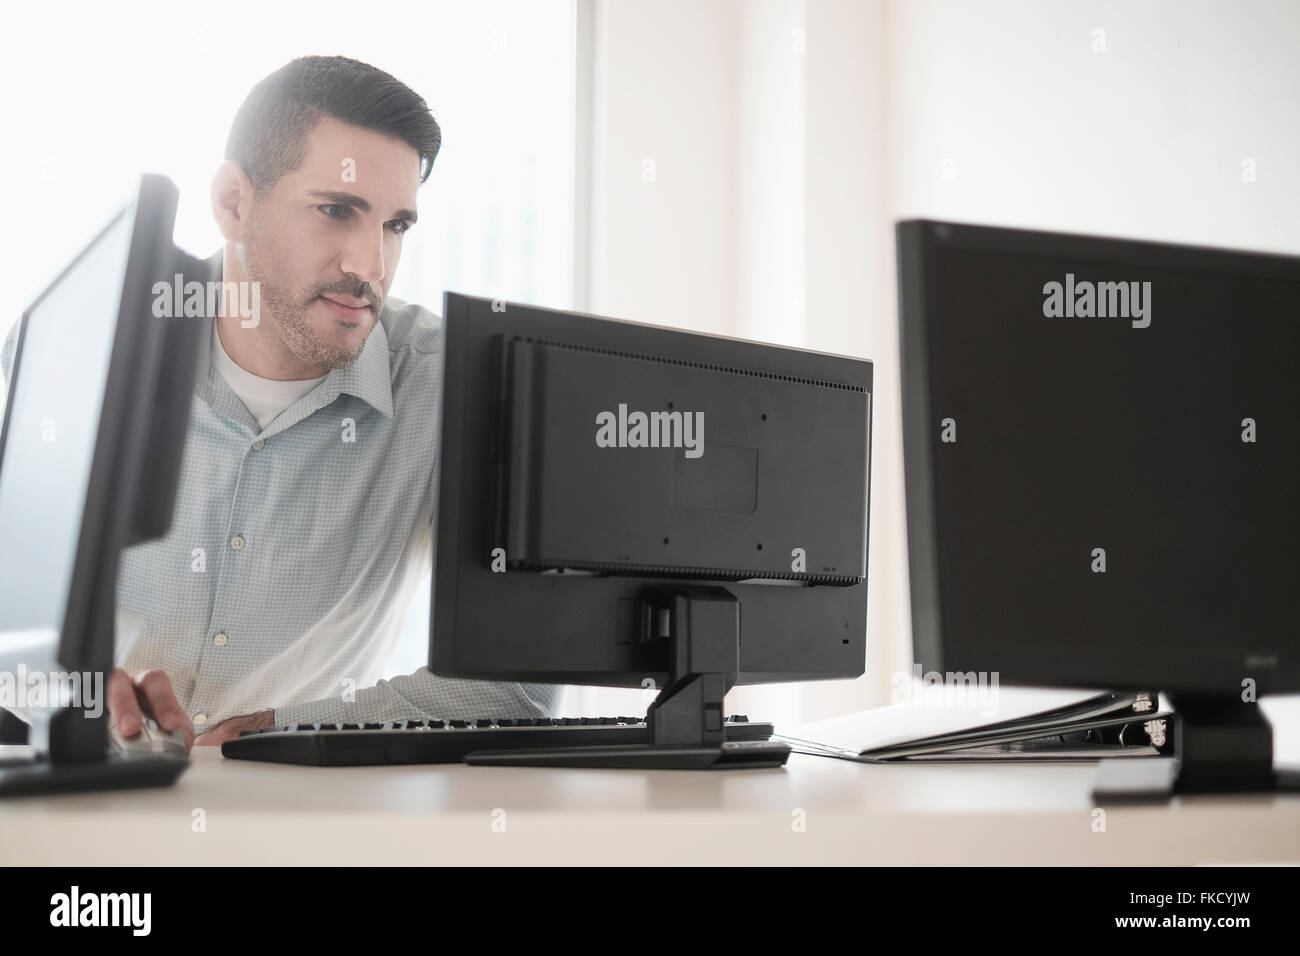 Man using computer in office Banque D'Images